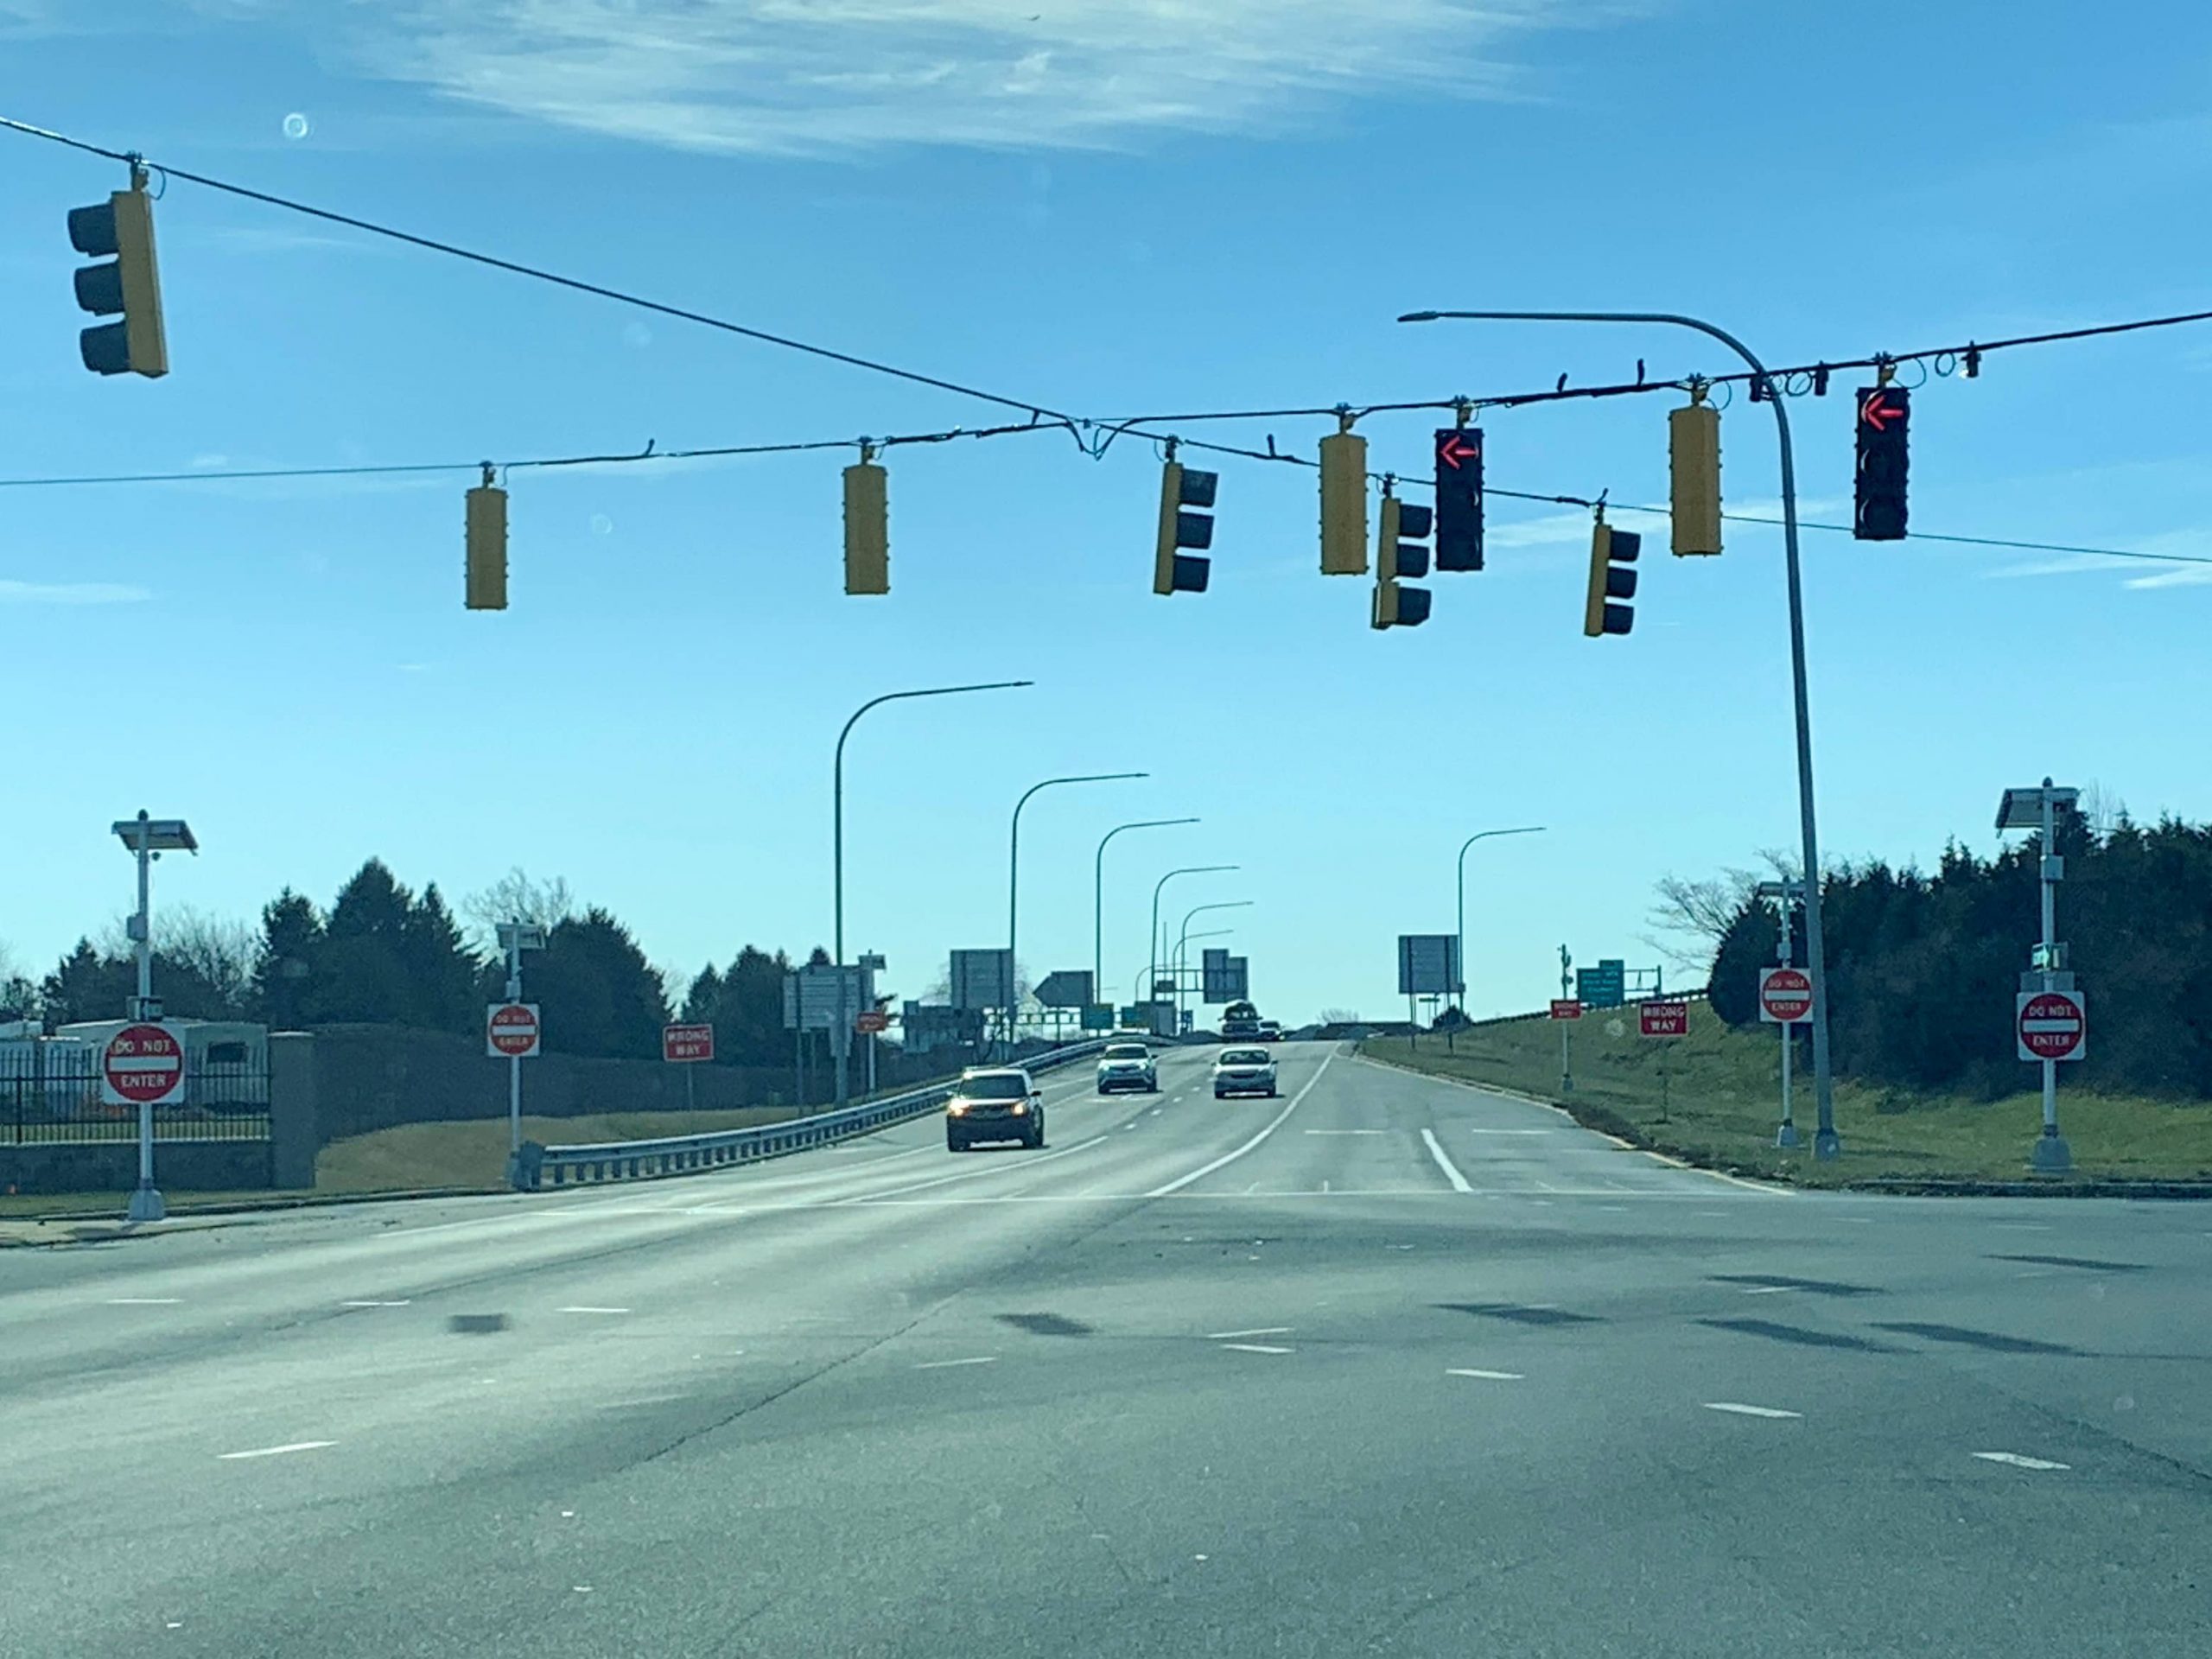 The first wrong way driver detection has been installed near the Dover Air Force Base